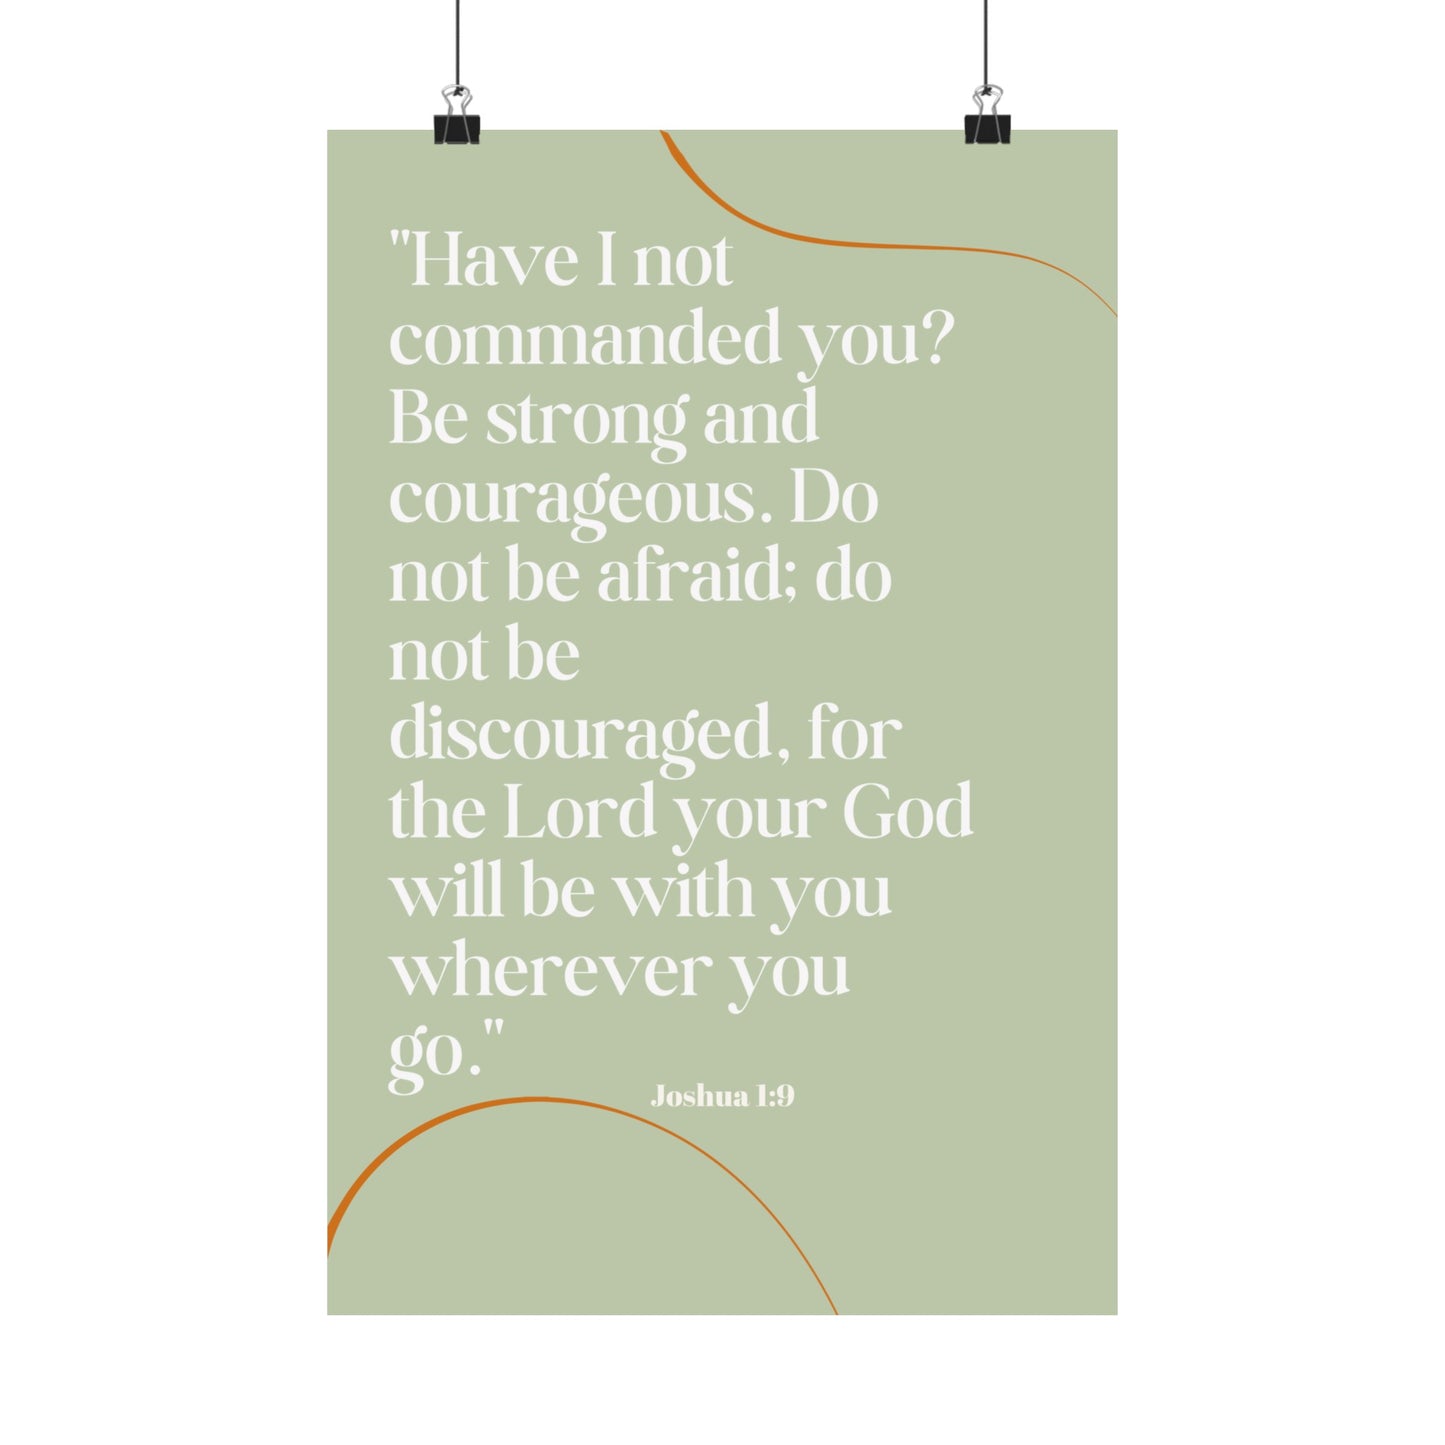 Premium Christian Poster: "Be Strong and Courageous" - Archival Paper | Assembled in the USA,Assembled in USA,Back to School,Home & Living,Indoor,Made in the USA,Made in USA,Matte,Paper,Posters,Valentine's Day promotion